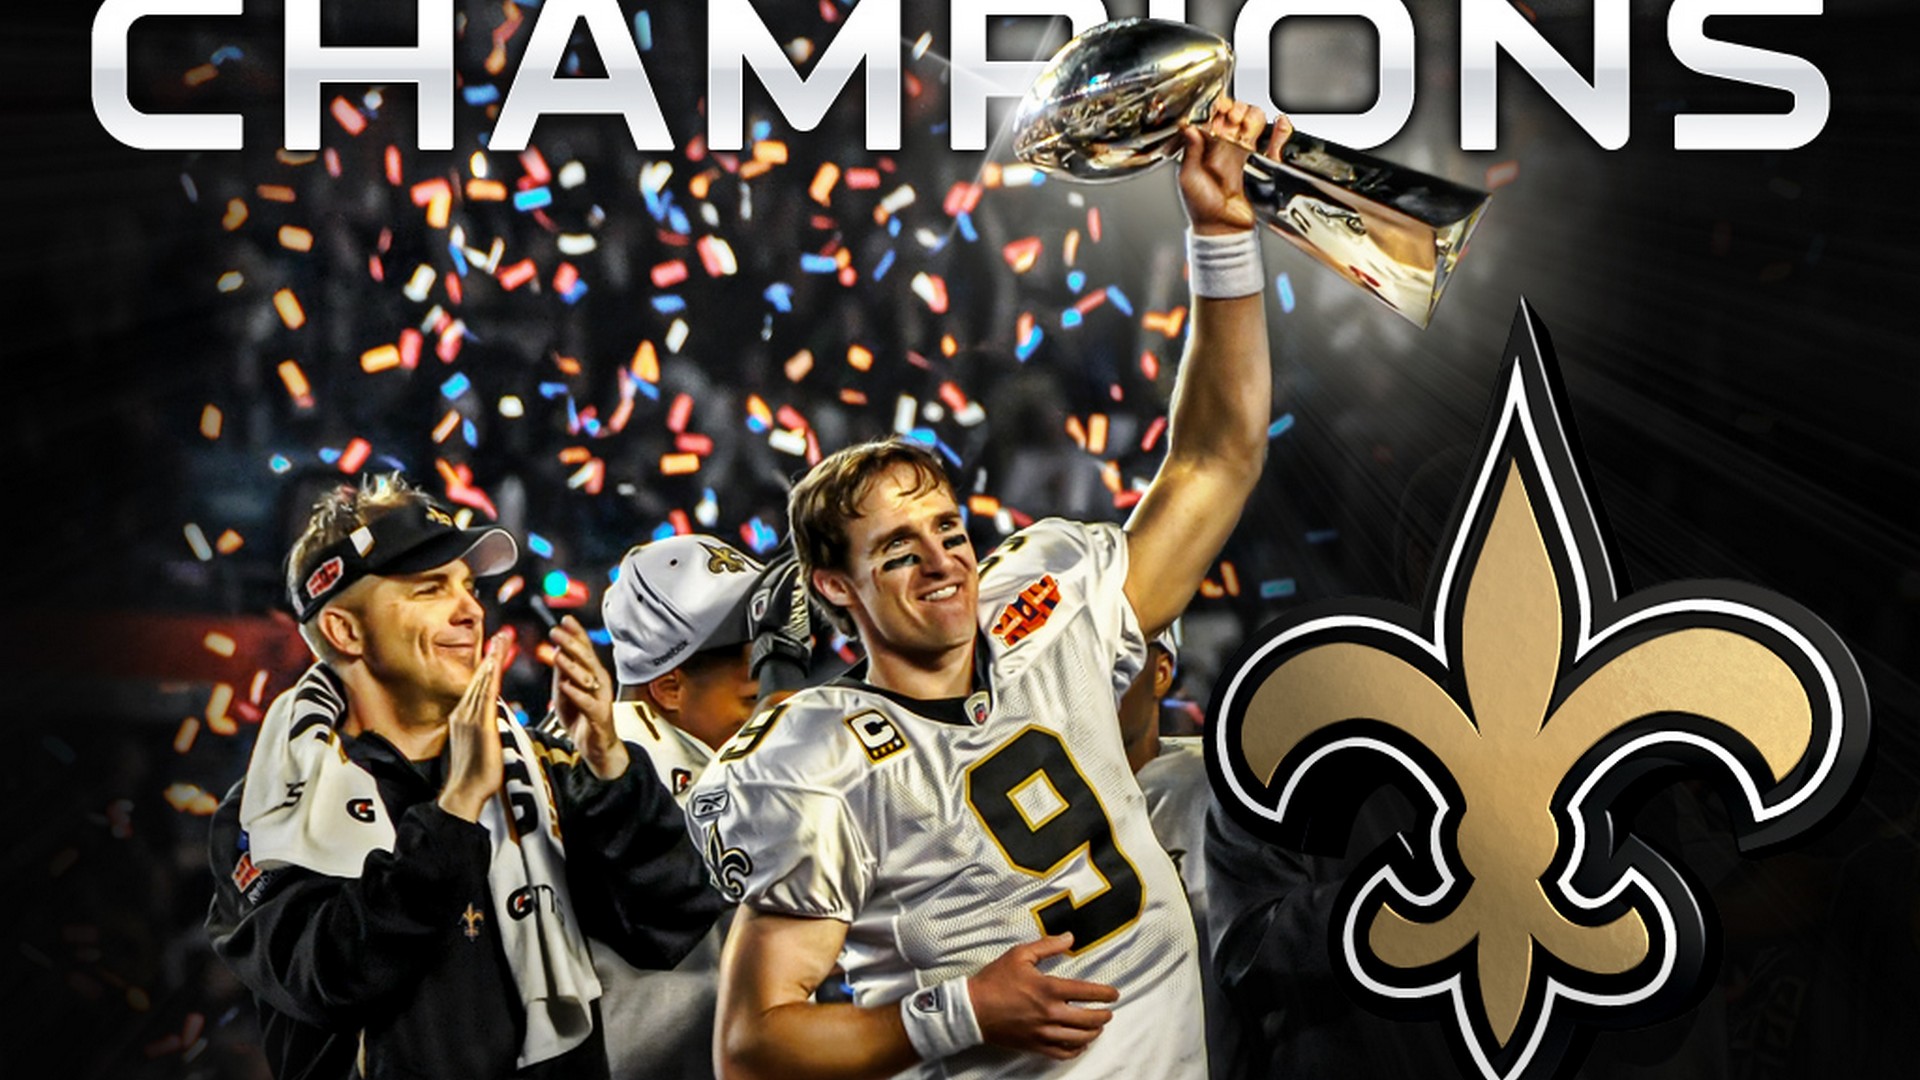 Wallpapers New Orleans Saints NFL With Resolution 1920X1080 pixel. You can make this wallpaper for your Mac or Windows Desktop Background, iPhone, Android or Tablet and another Smartphone device for free